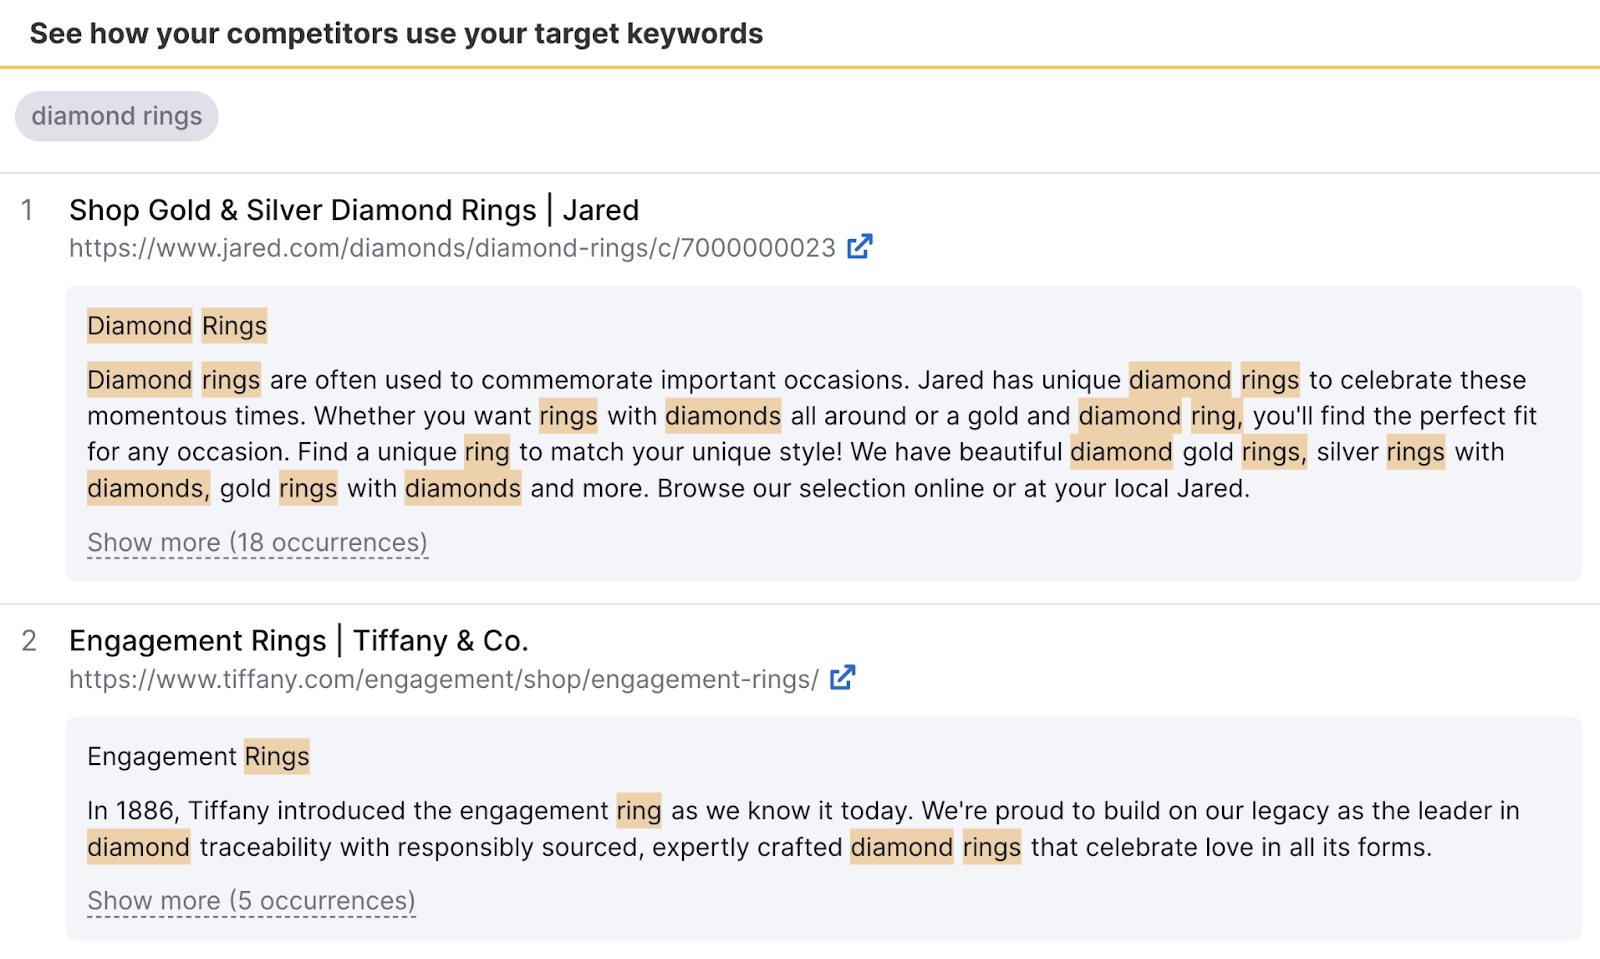 The "See how your competitors use your target keywords" section in the SEO Content Template results page